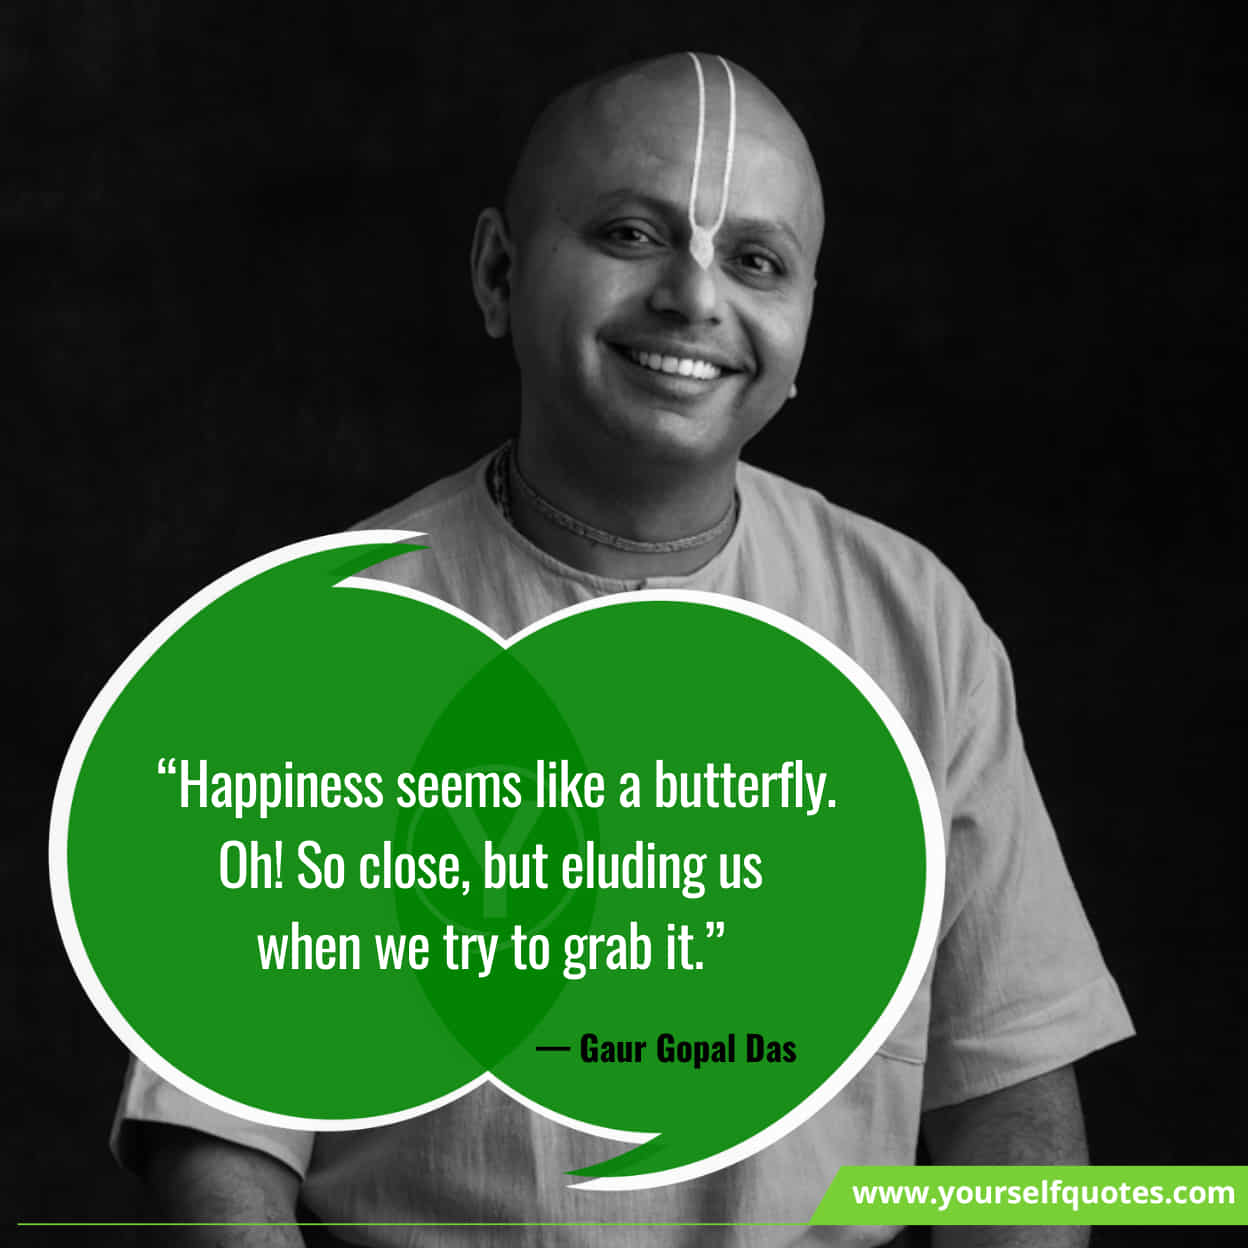 Gaur Gopal Das Quotes About Happiness